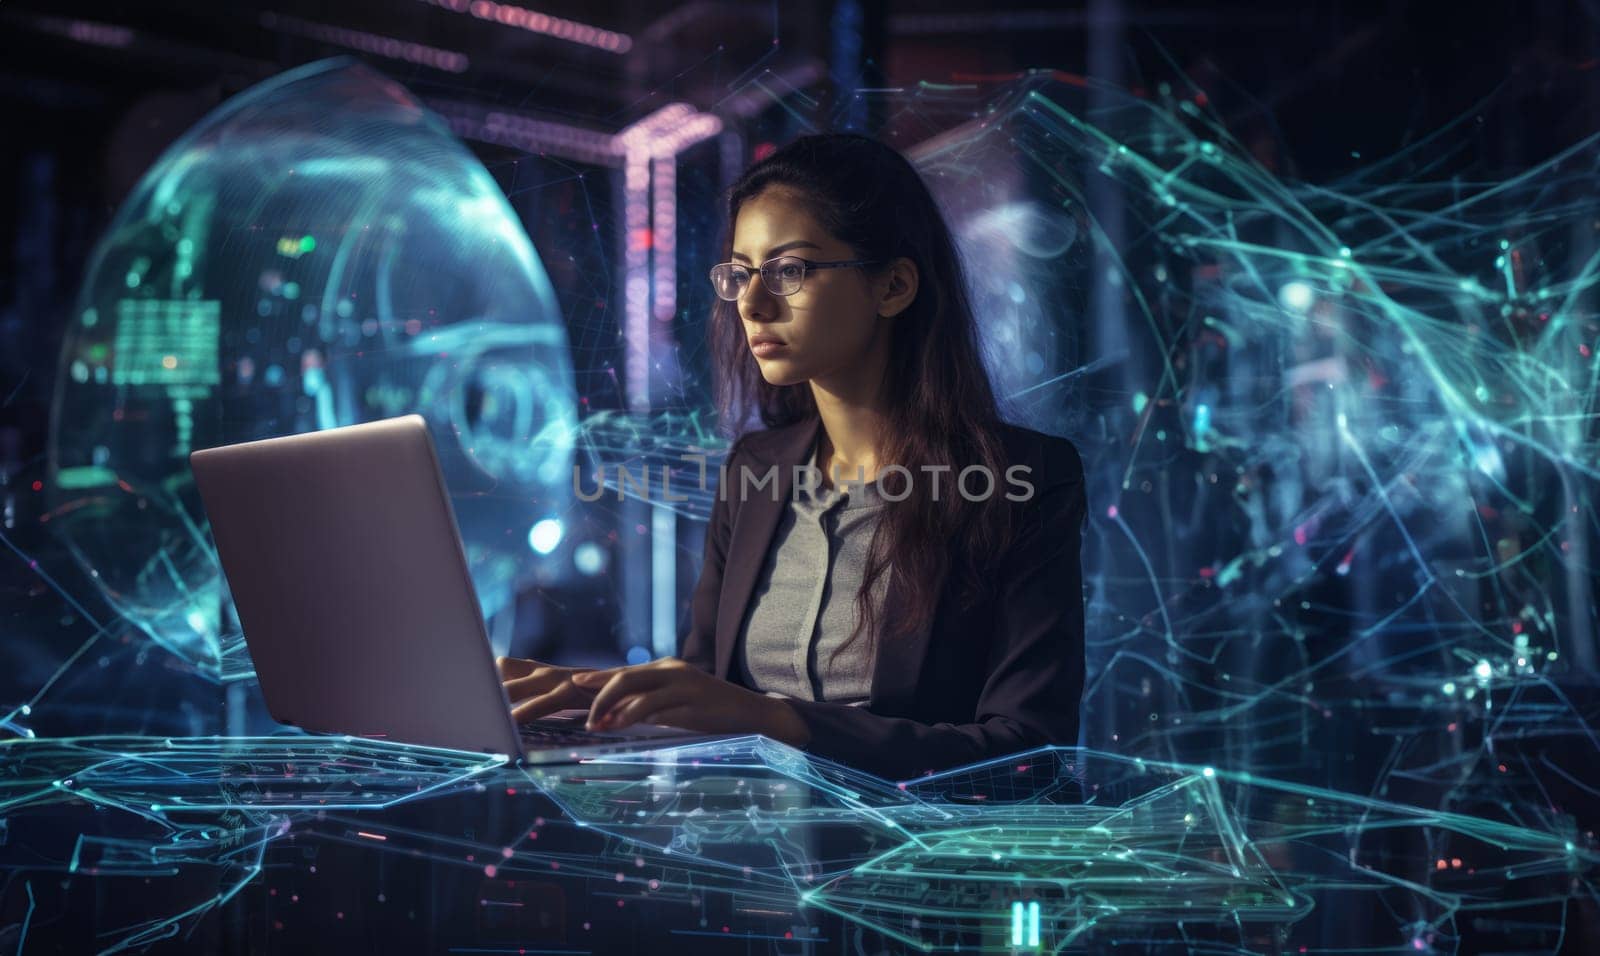 A futuristic scene of cyber exploration, a woman hacker immersed in her work, surrounded by symbolic holographic technology, delves into the digital realm with skill and determination